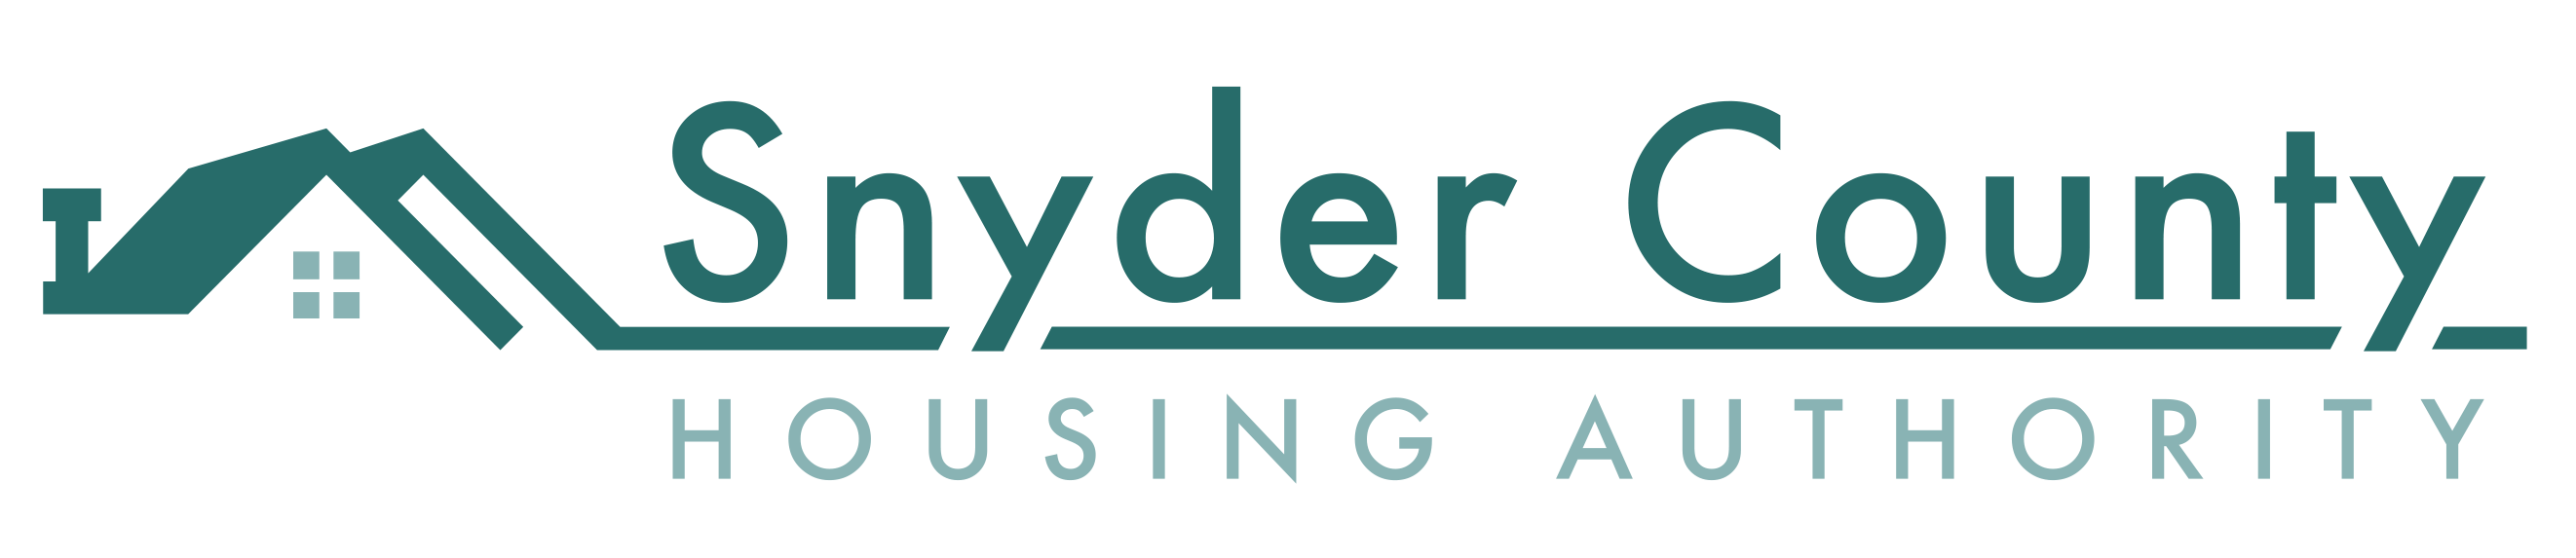 Snyder County Housing Authority